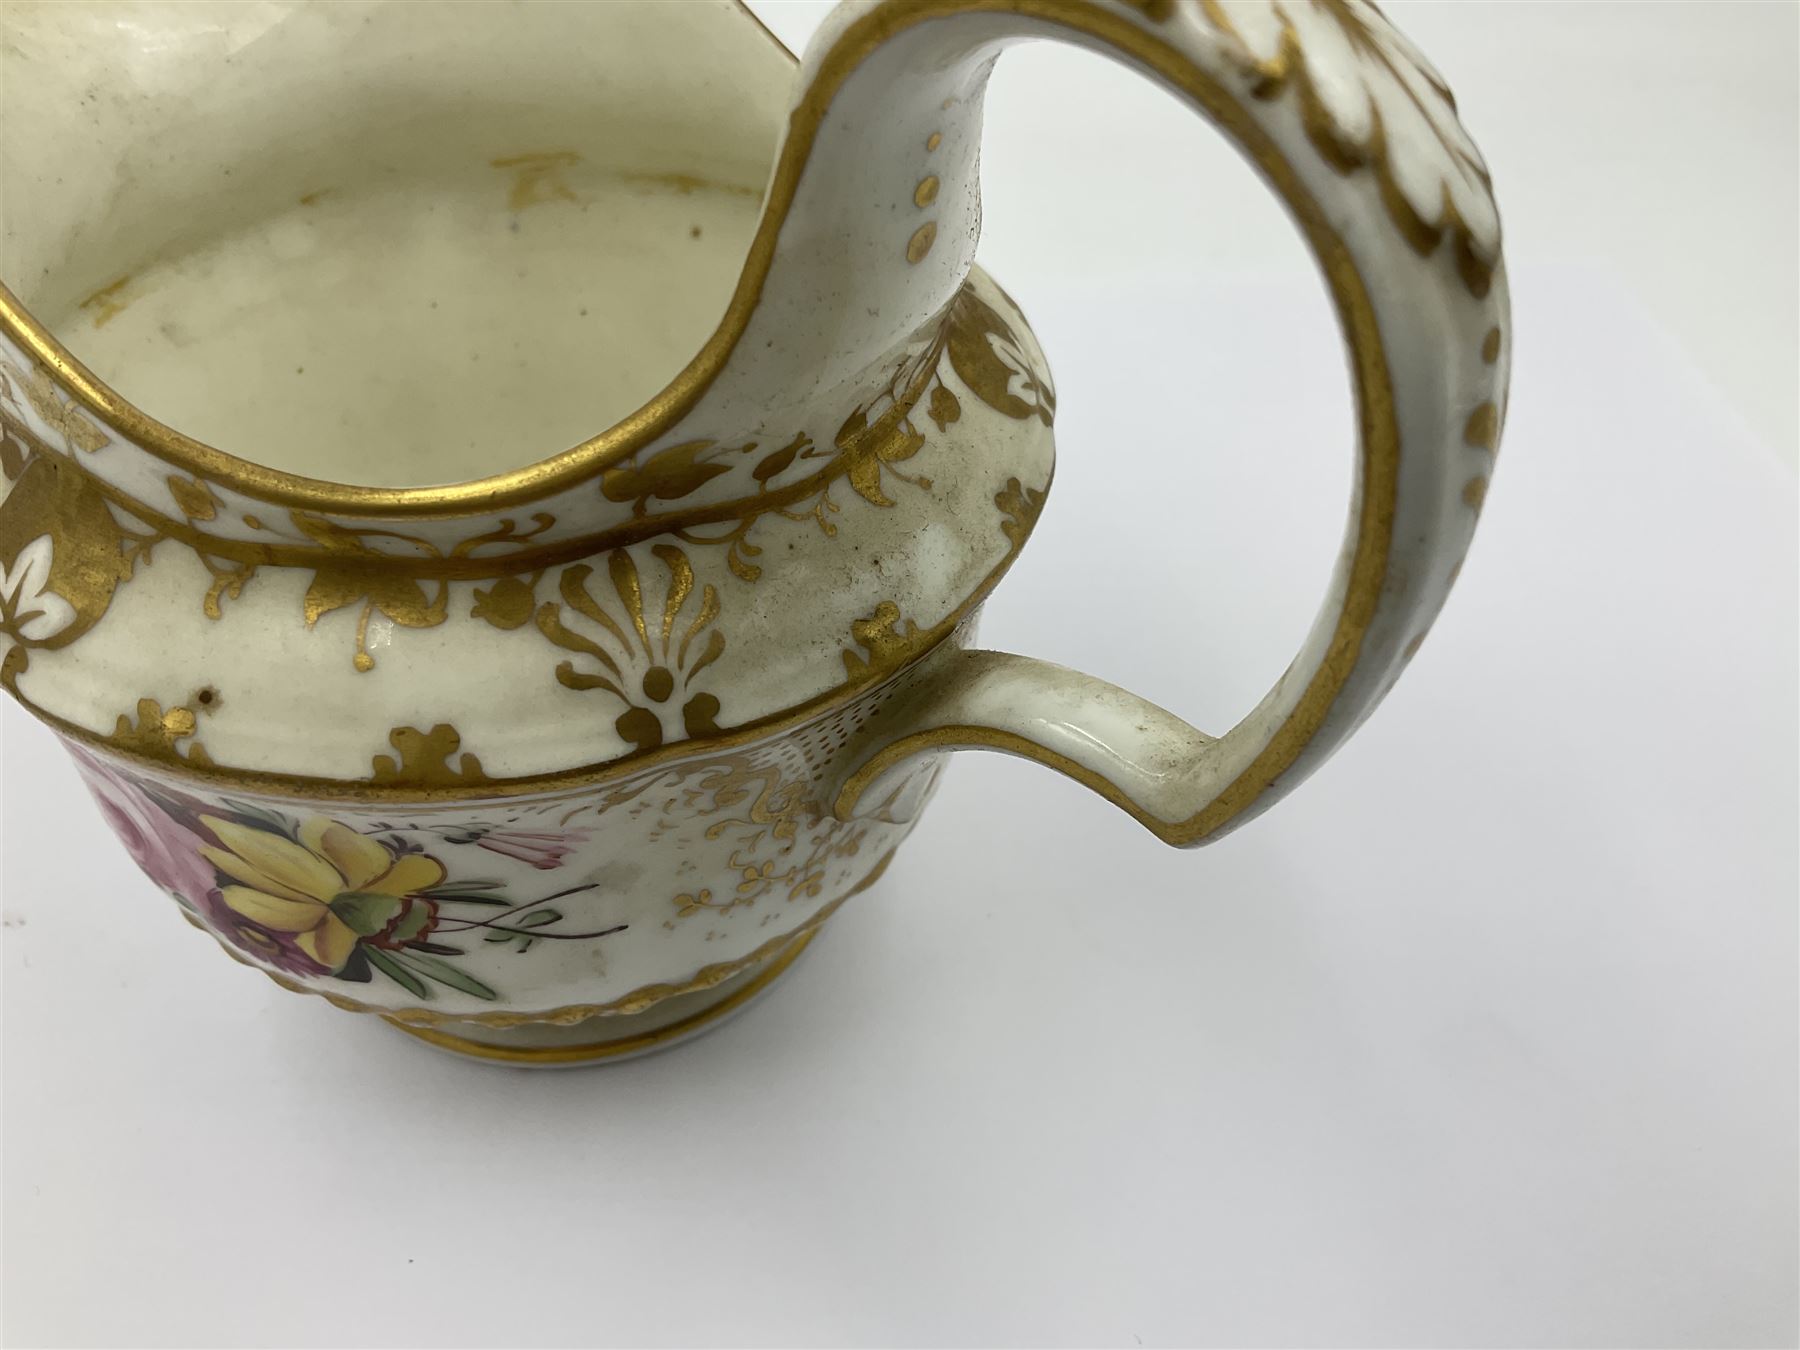 19th century Thomas Goode and Co jug - Image 5 of 22